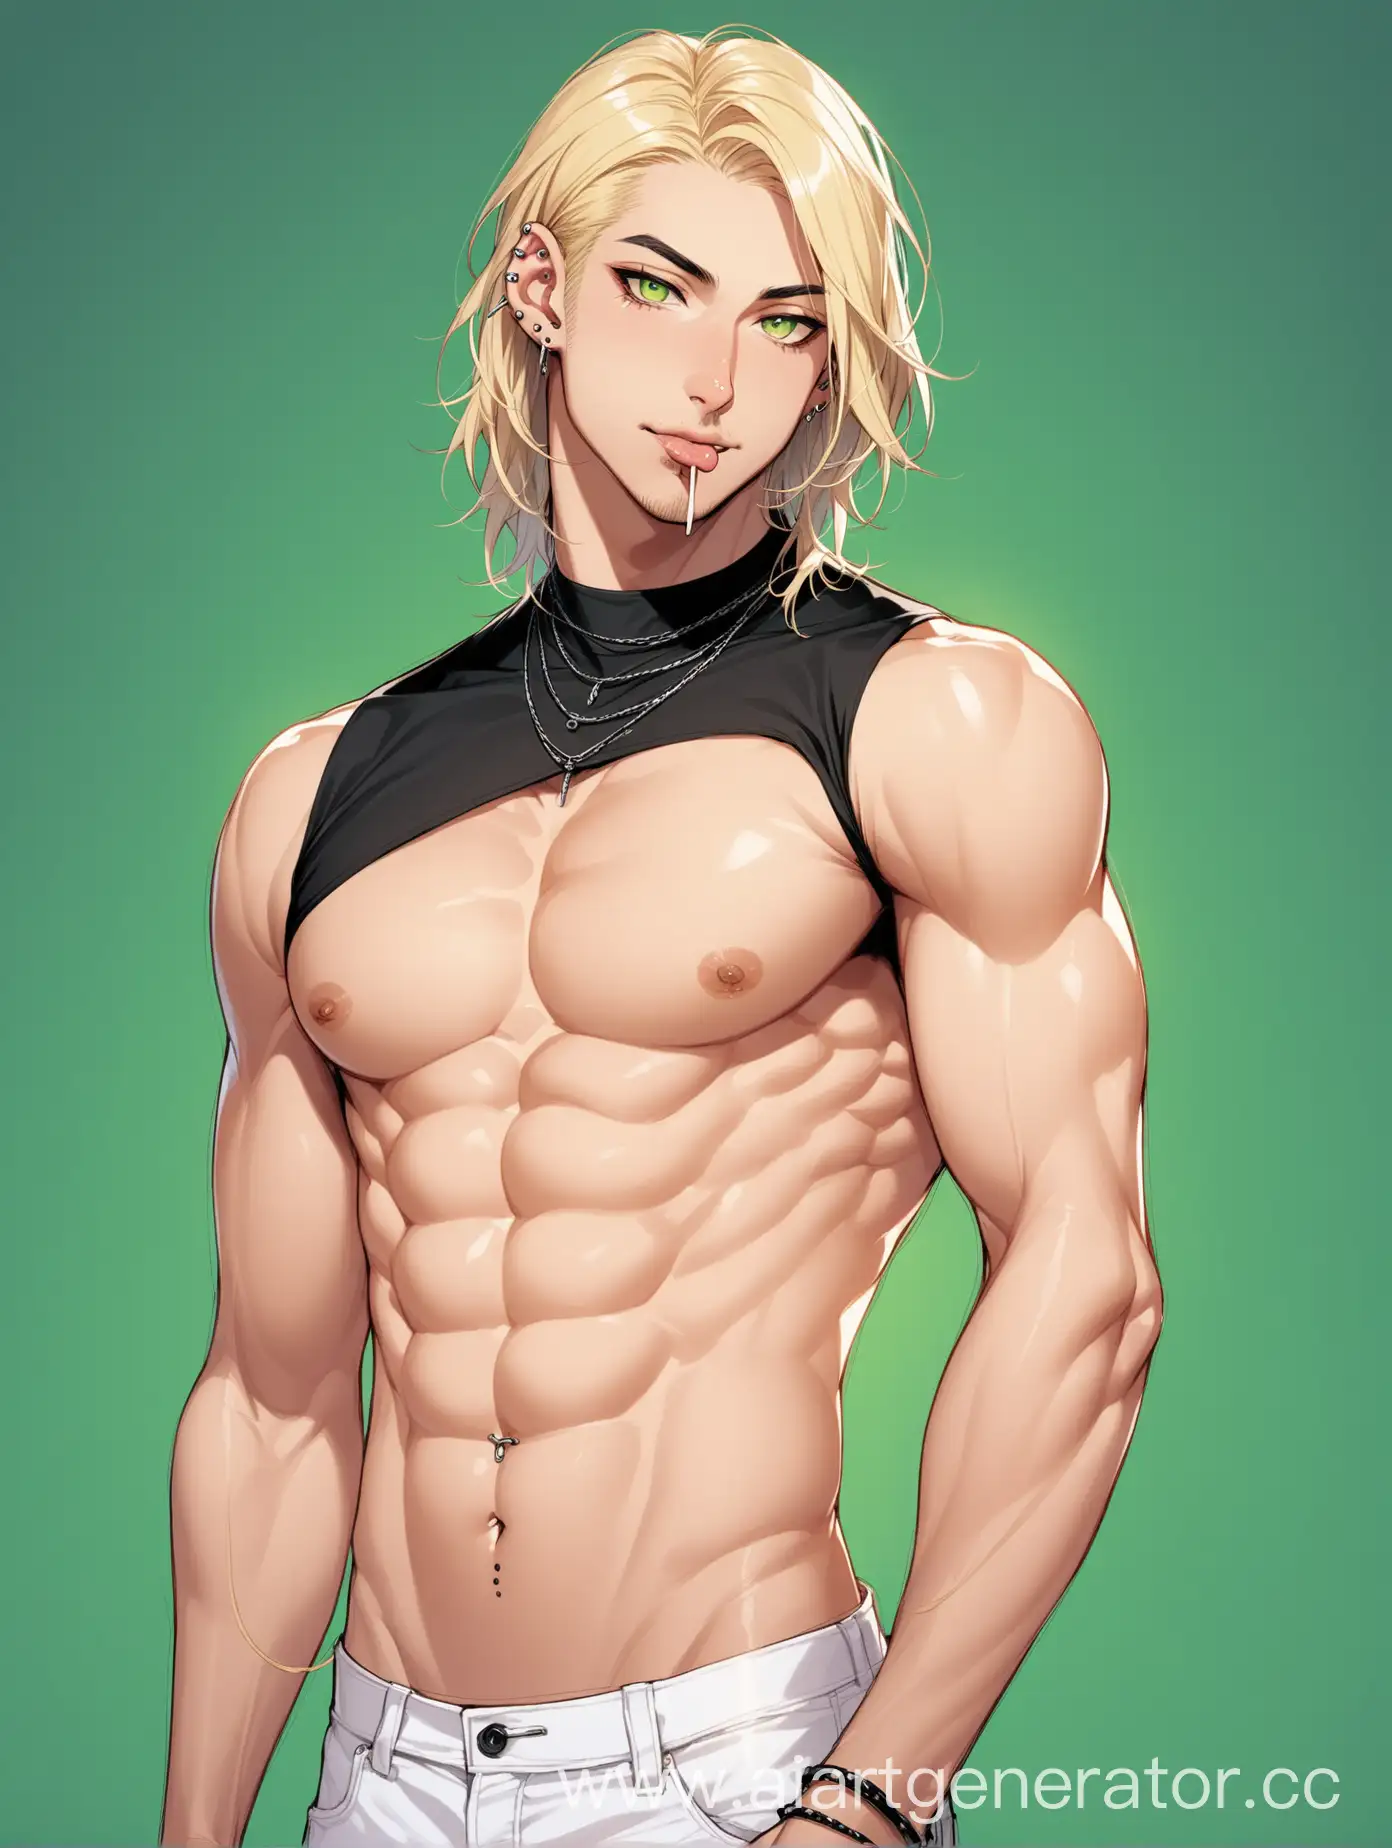 Man, Average height, Skinny, Weakly defined muscles, Very light blonde hair reaching the middle of the back, Green slightly narrow eyes, Straight nose, There is a little stubble, Lots of hair on arms and legs and some on chest, Nose ring piercing, Two piercings under the lip, Piercing in the middle of the tongue, Black shirt with elbow-length sleeves, White jeans with holes in the knees.